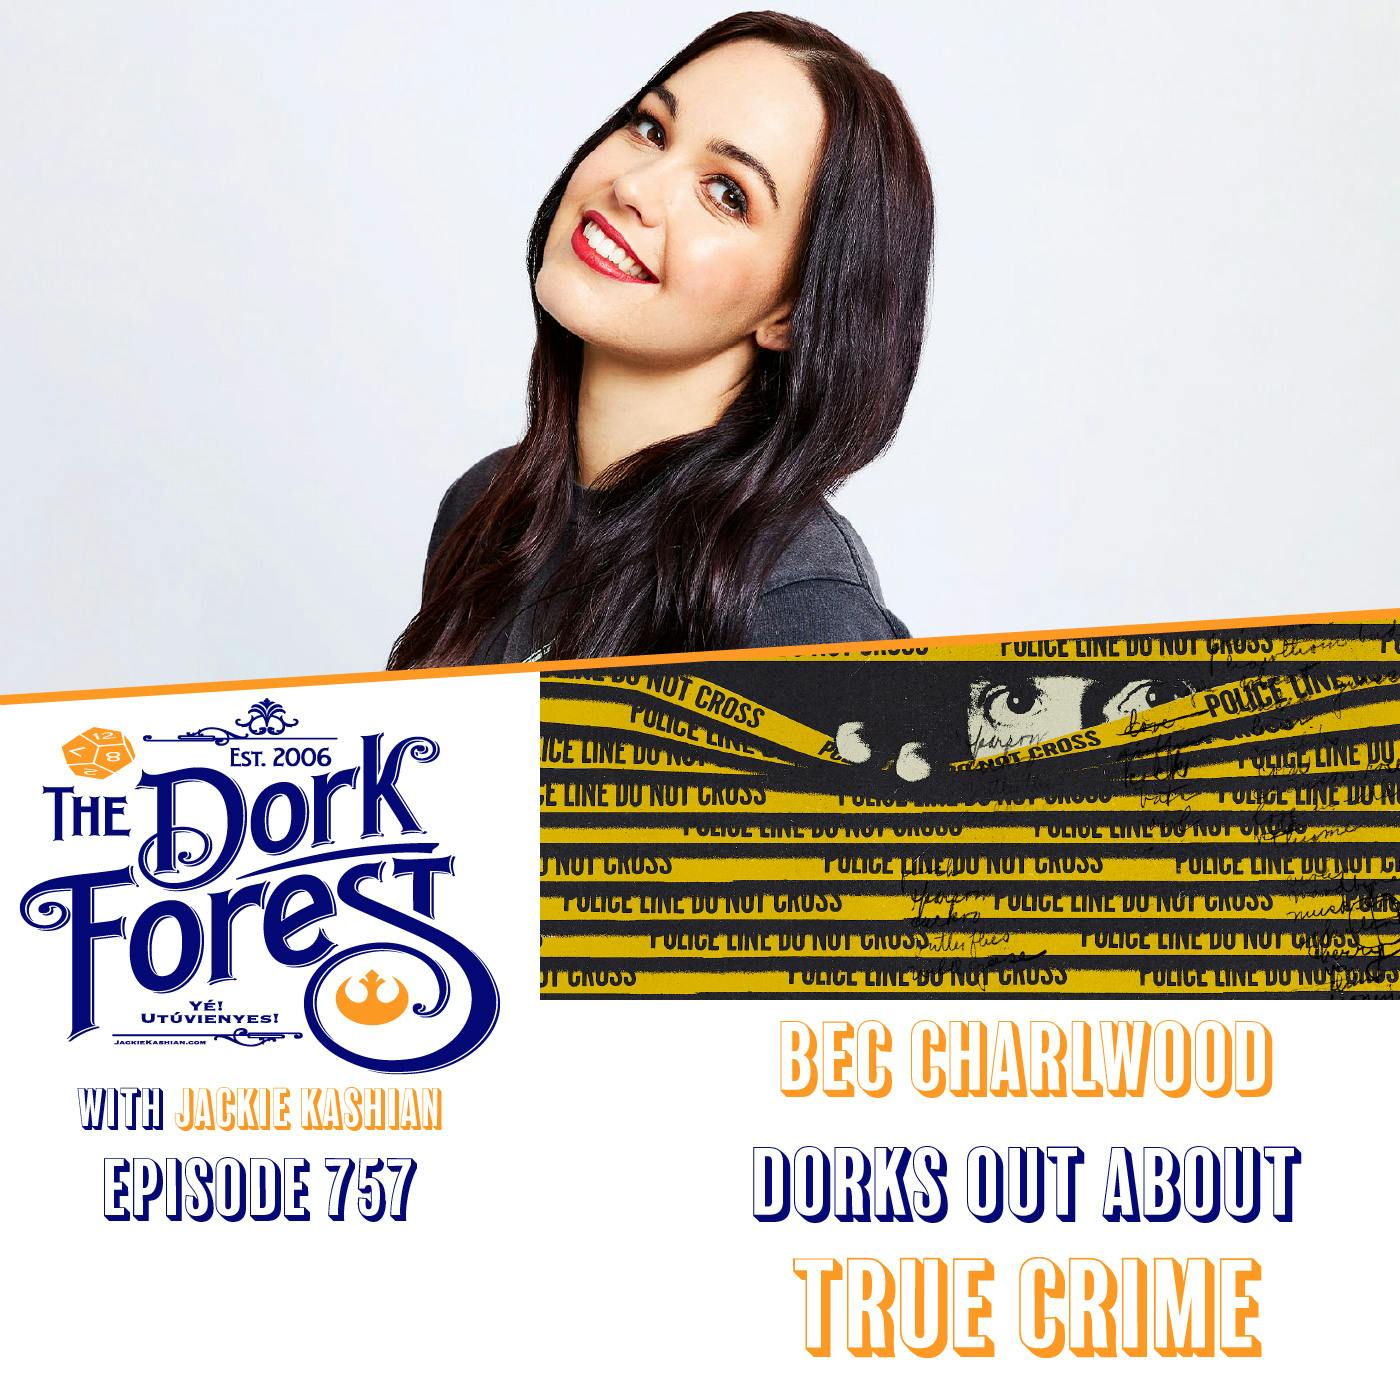 Bec Charlwood and TRUE CRIME – EP 757